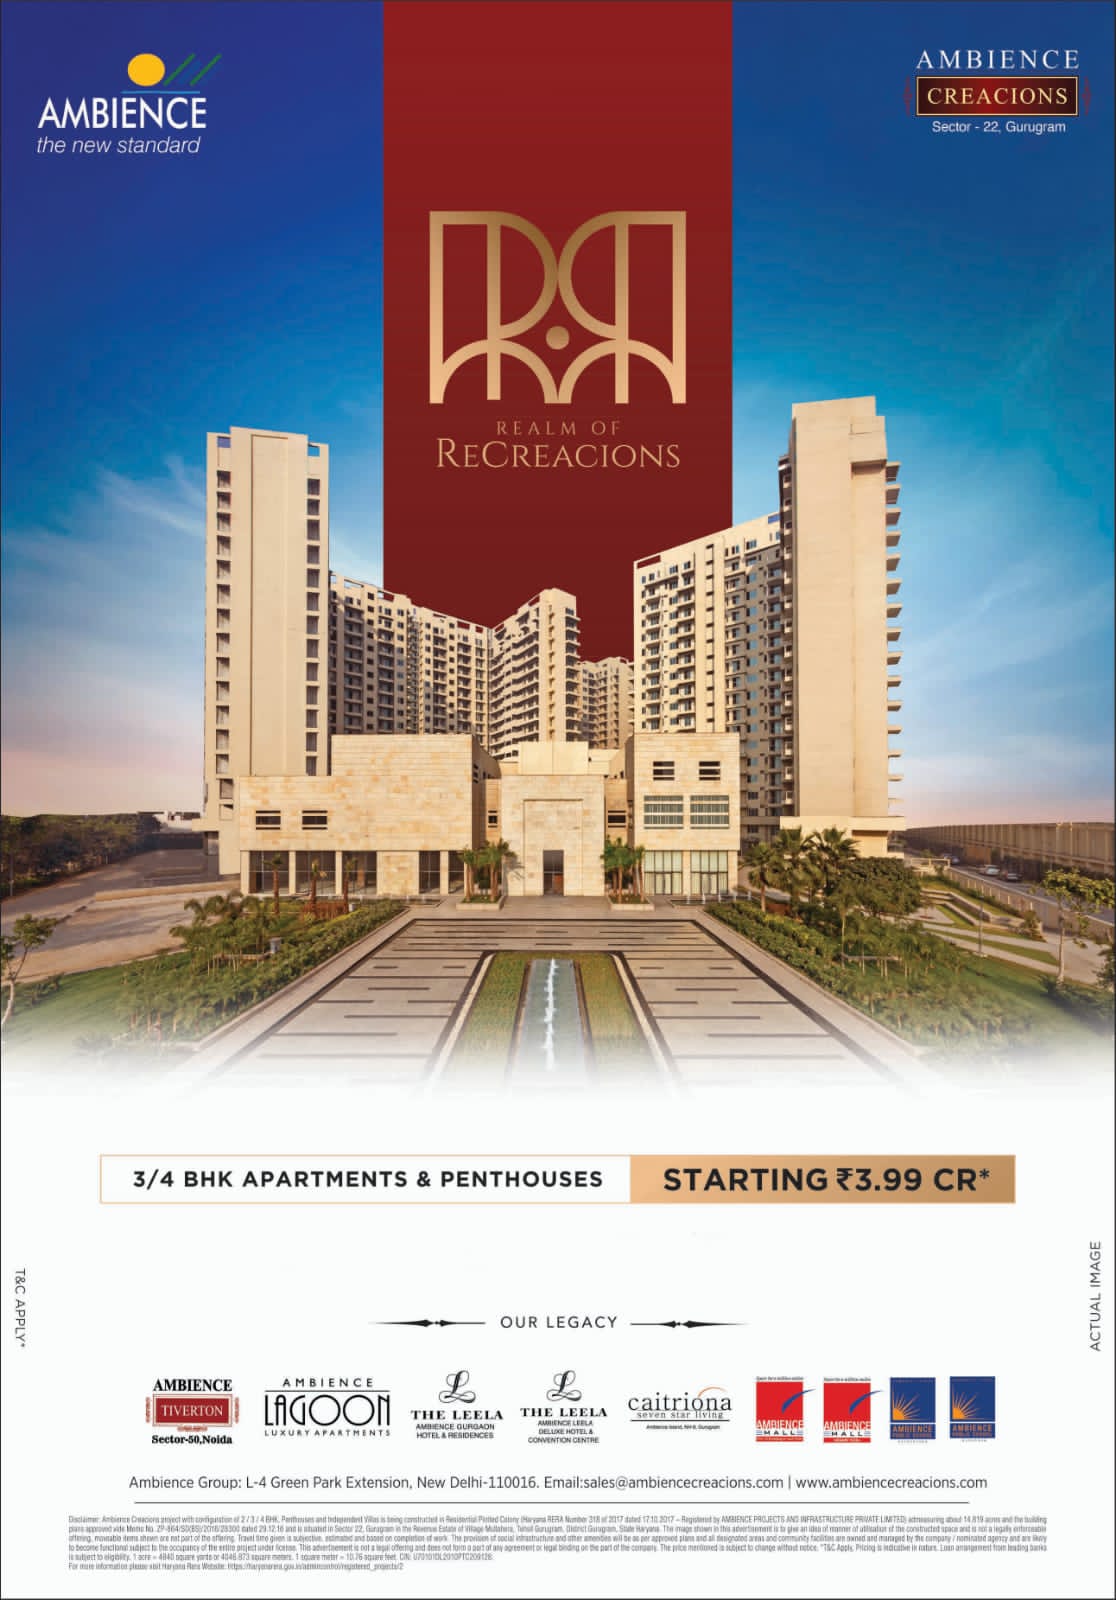 Luxurious 3 & 4 BHK apartments and penthouses starting Rs 3.99 Cr at Ambience Creacions, Gurgaon